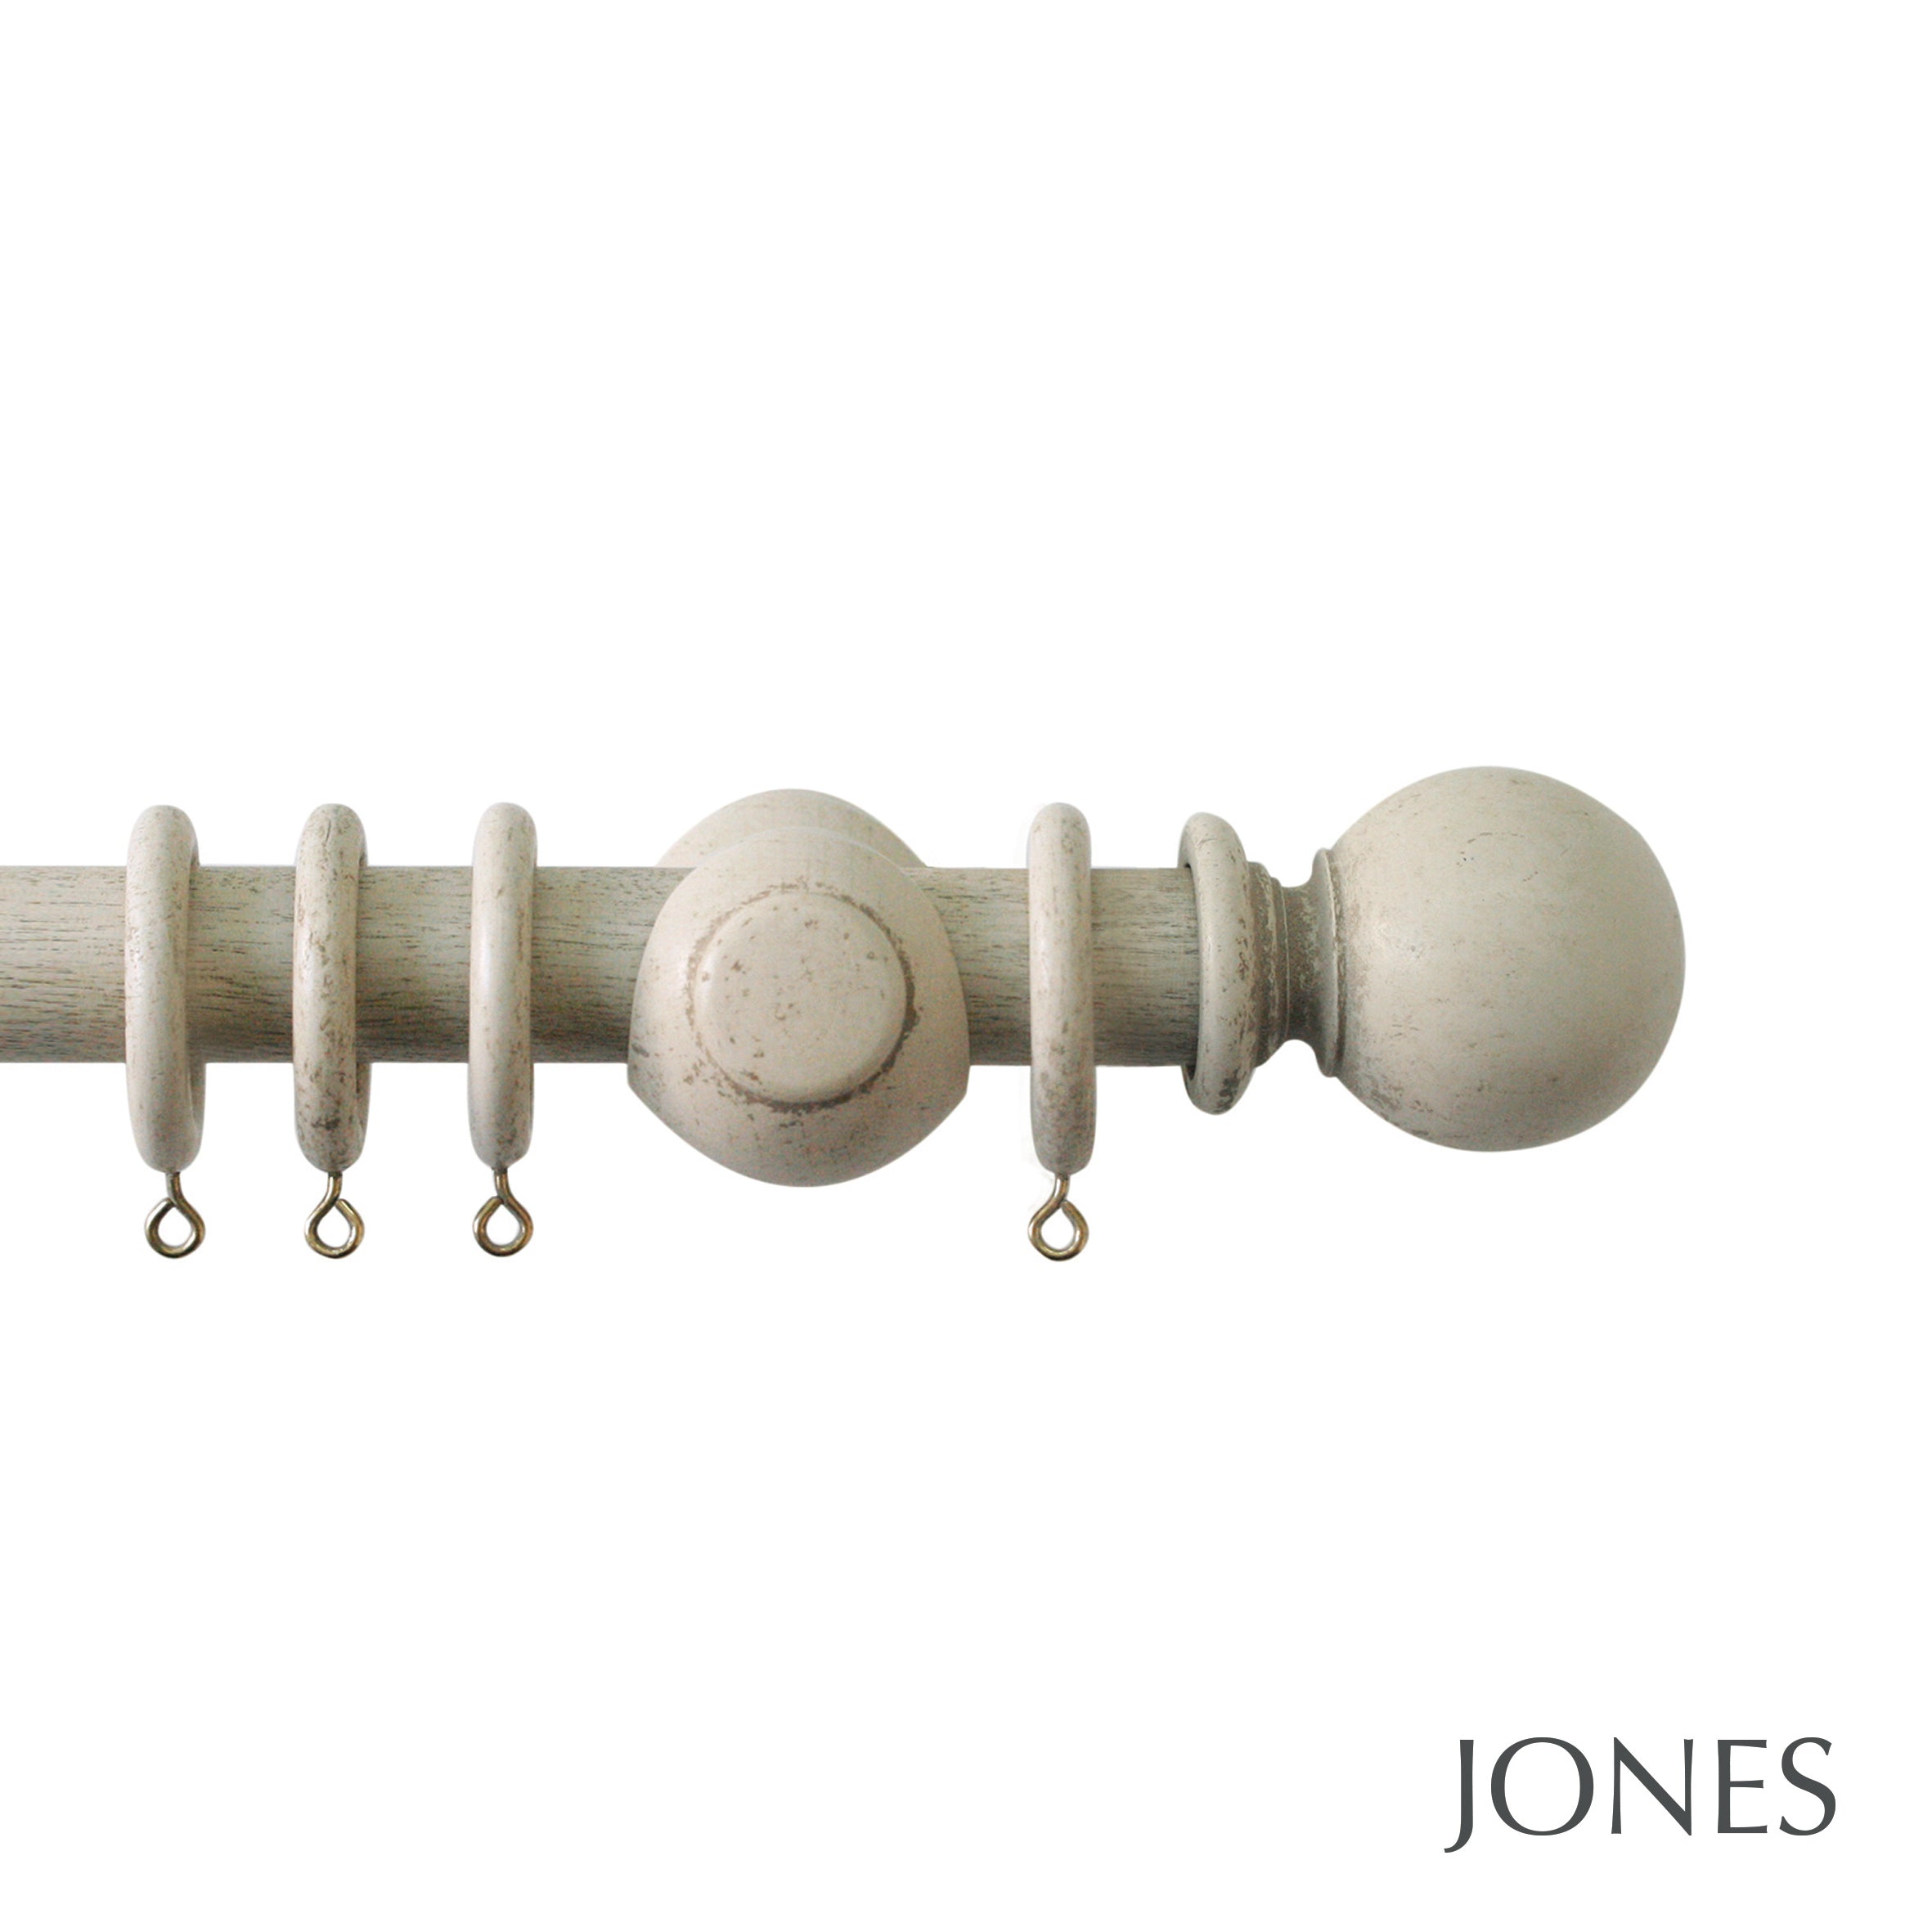 Jones Interiors Cathedral Ball Finial Curtain Pole Set in Putty